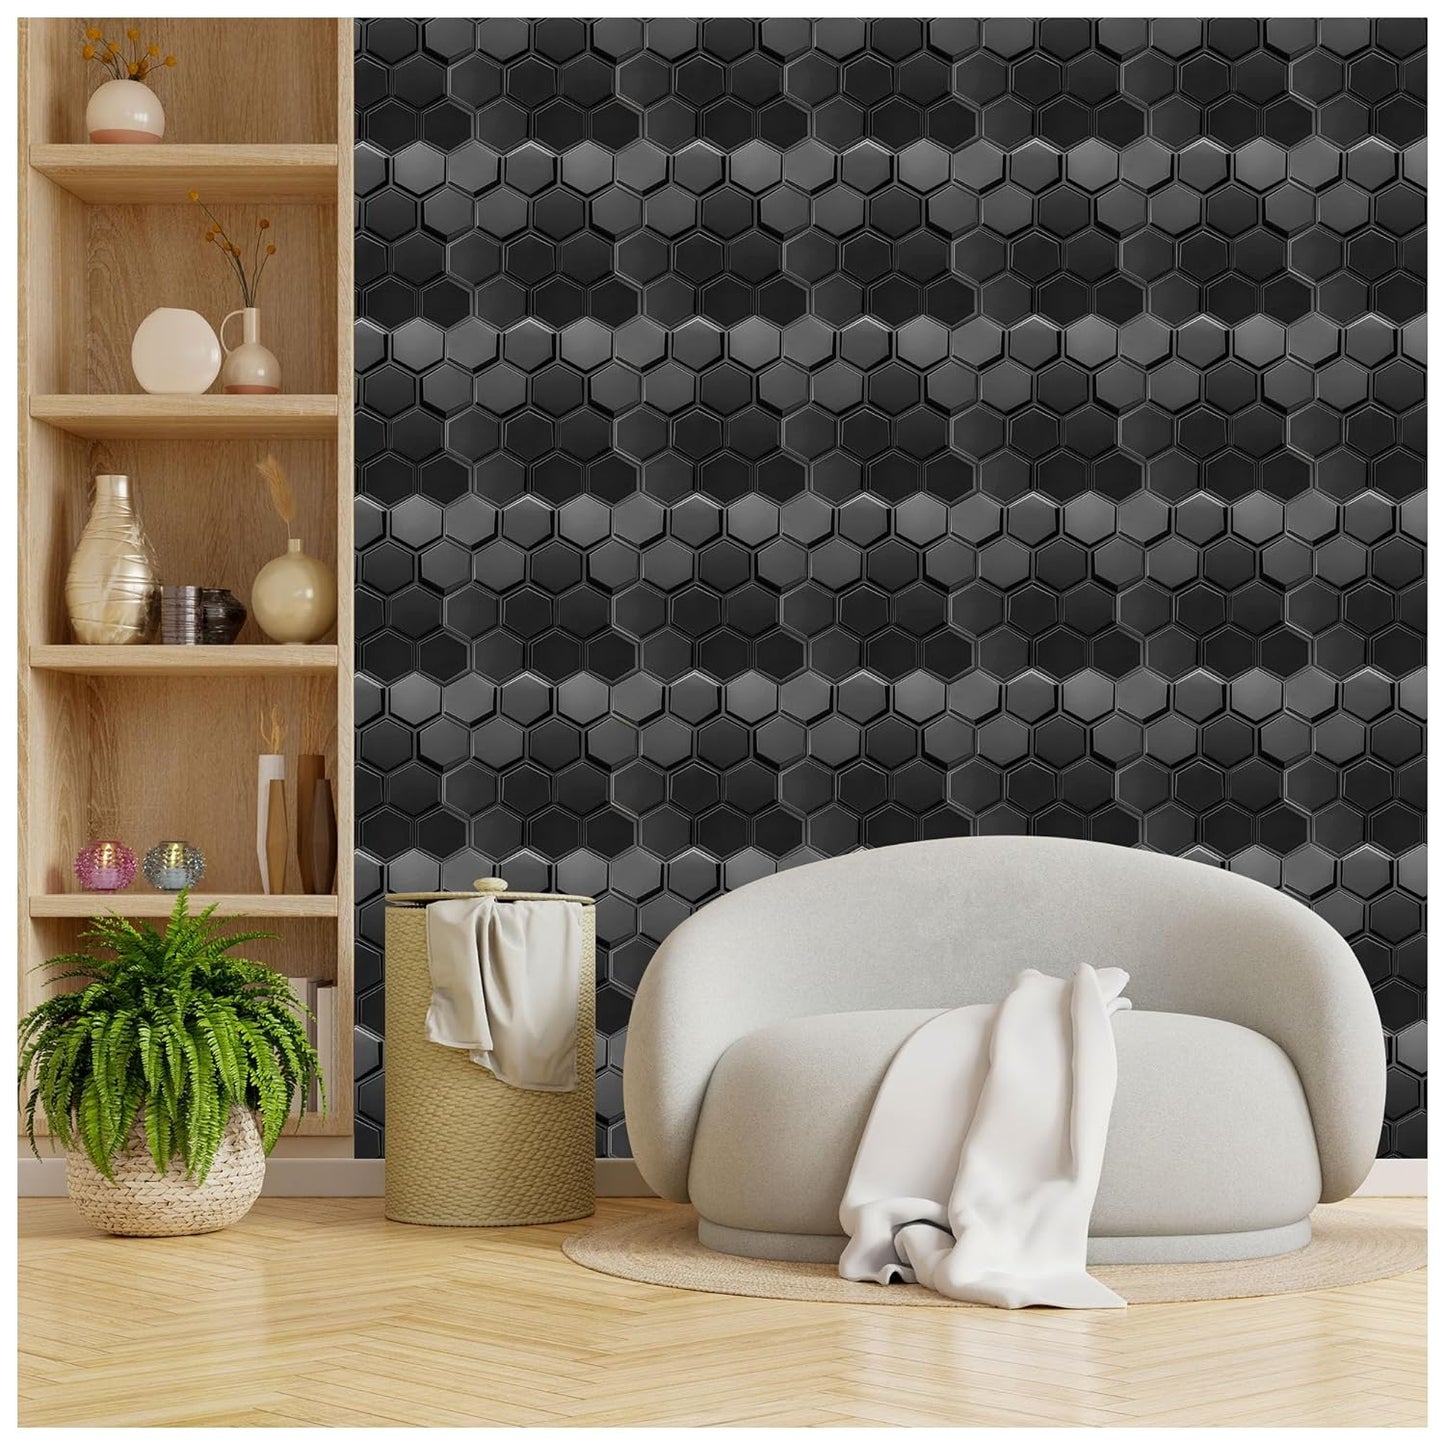 3D PVC Wall Panel Black Textures Hexagon Design Pack of 12 (43 X 45 cm Covers 25.44 Sq. ft.)